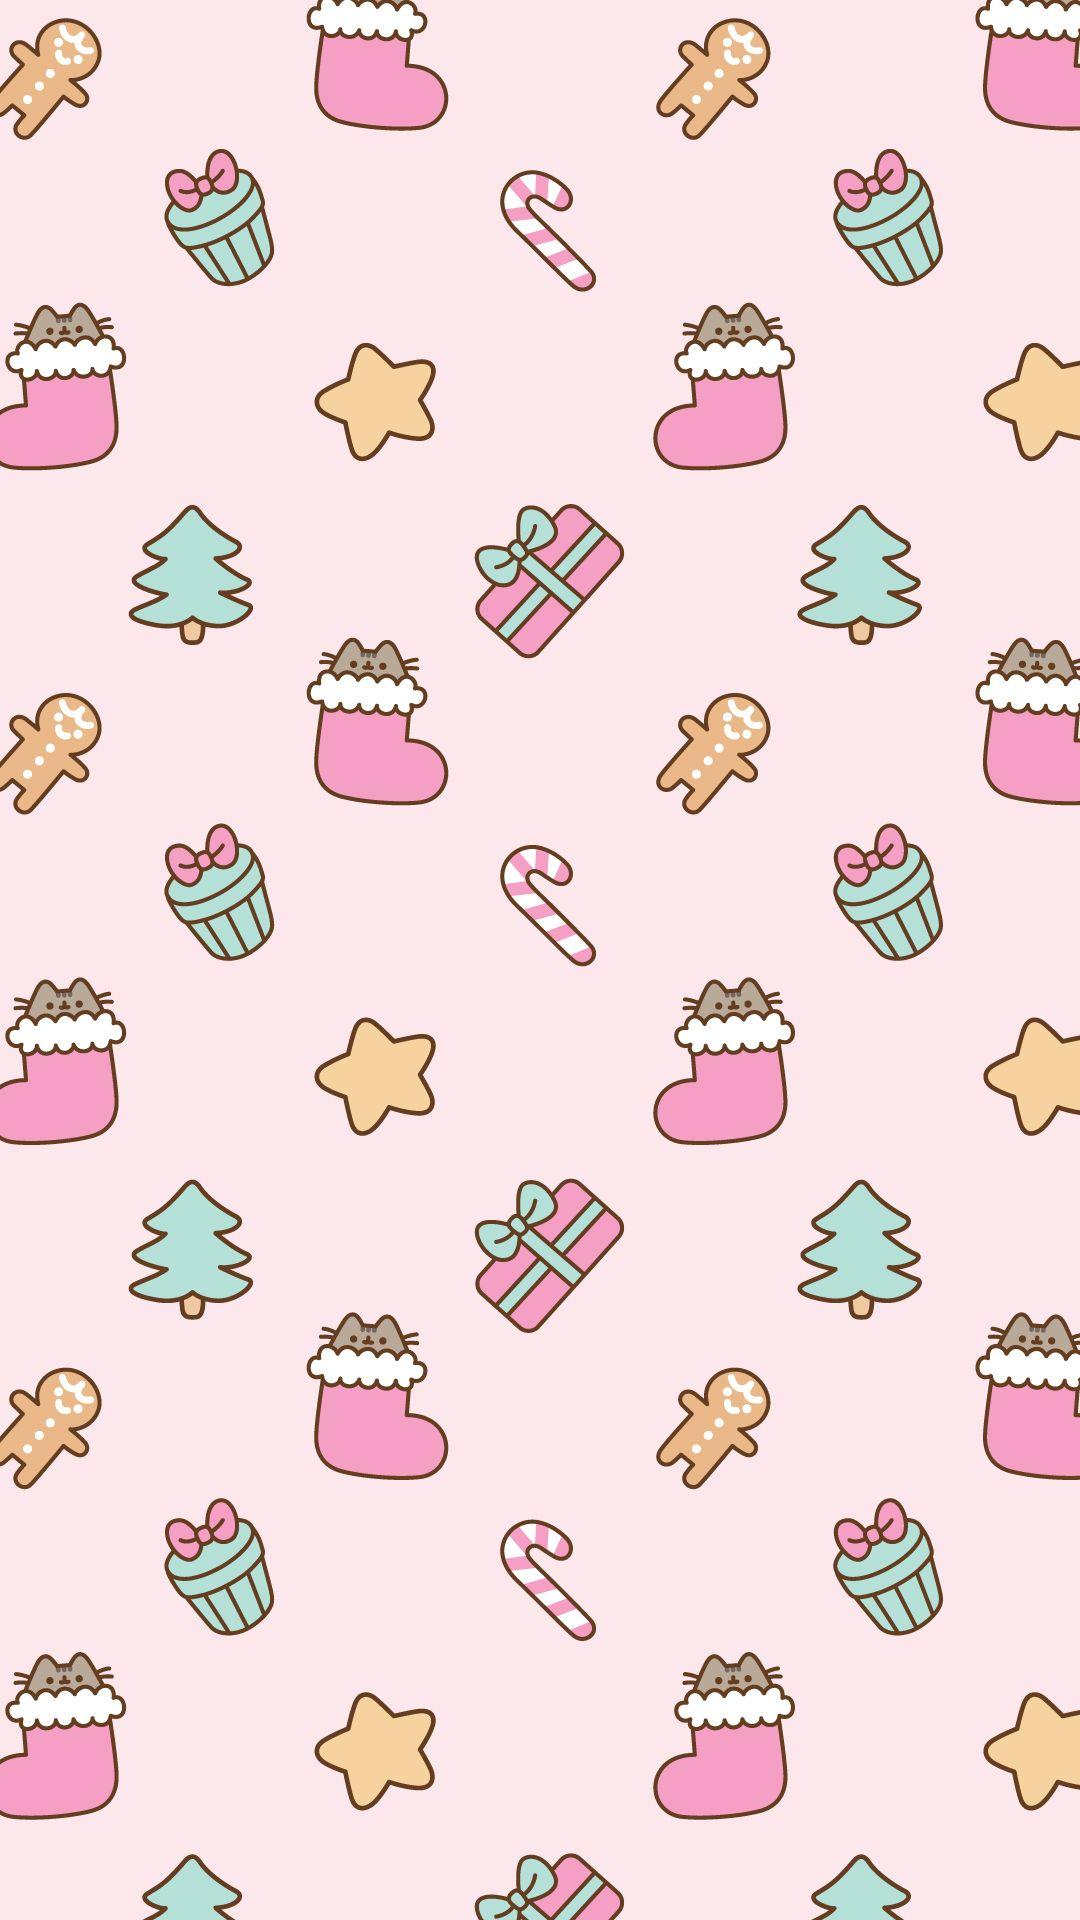 Free Christmas Pusheen Android and iPhone® Wallpaper - #ClairesBlog